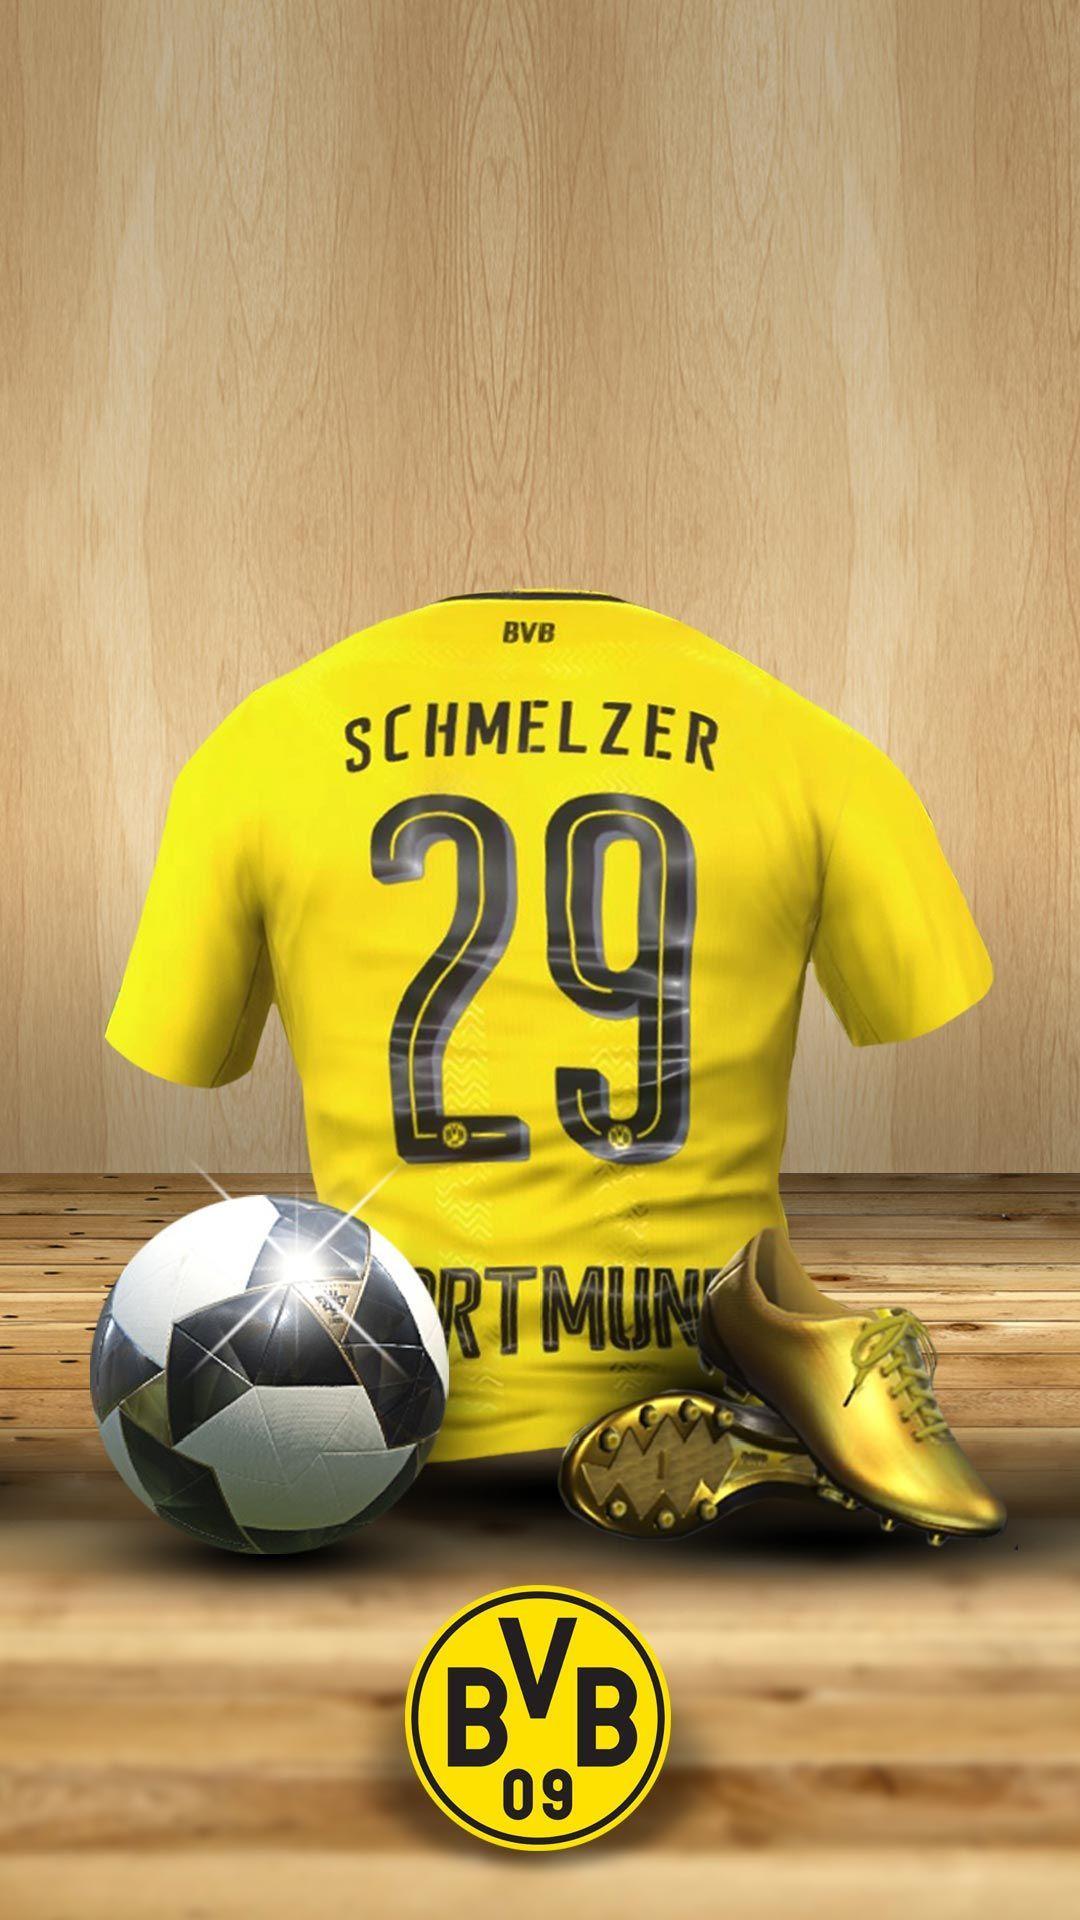 Schmelzer Pes 17 android, iphone wallpaper, mobile background. Fifa